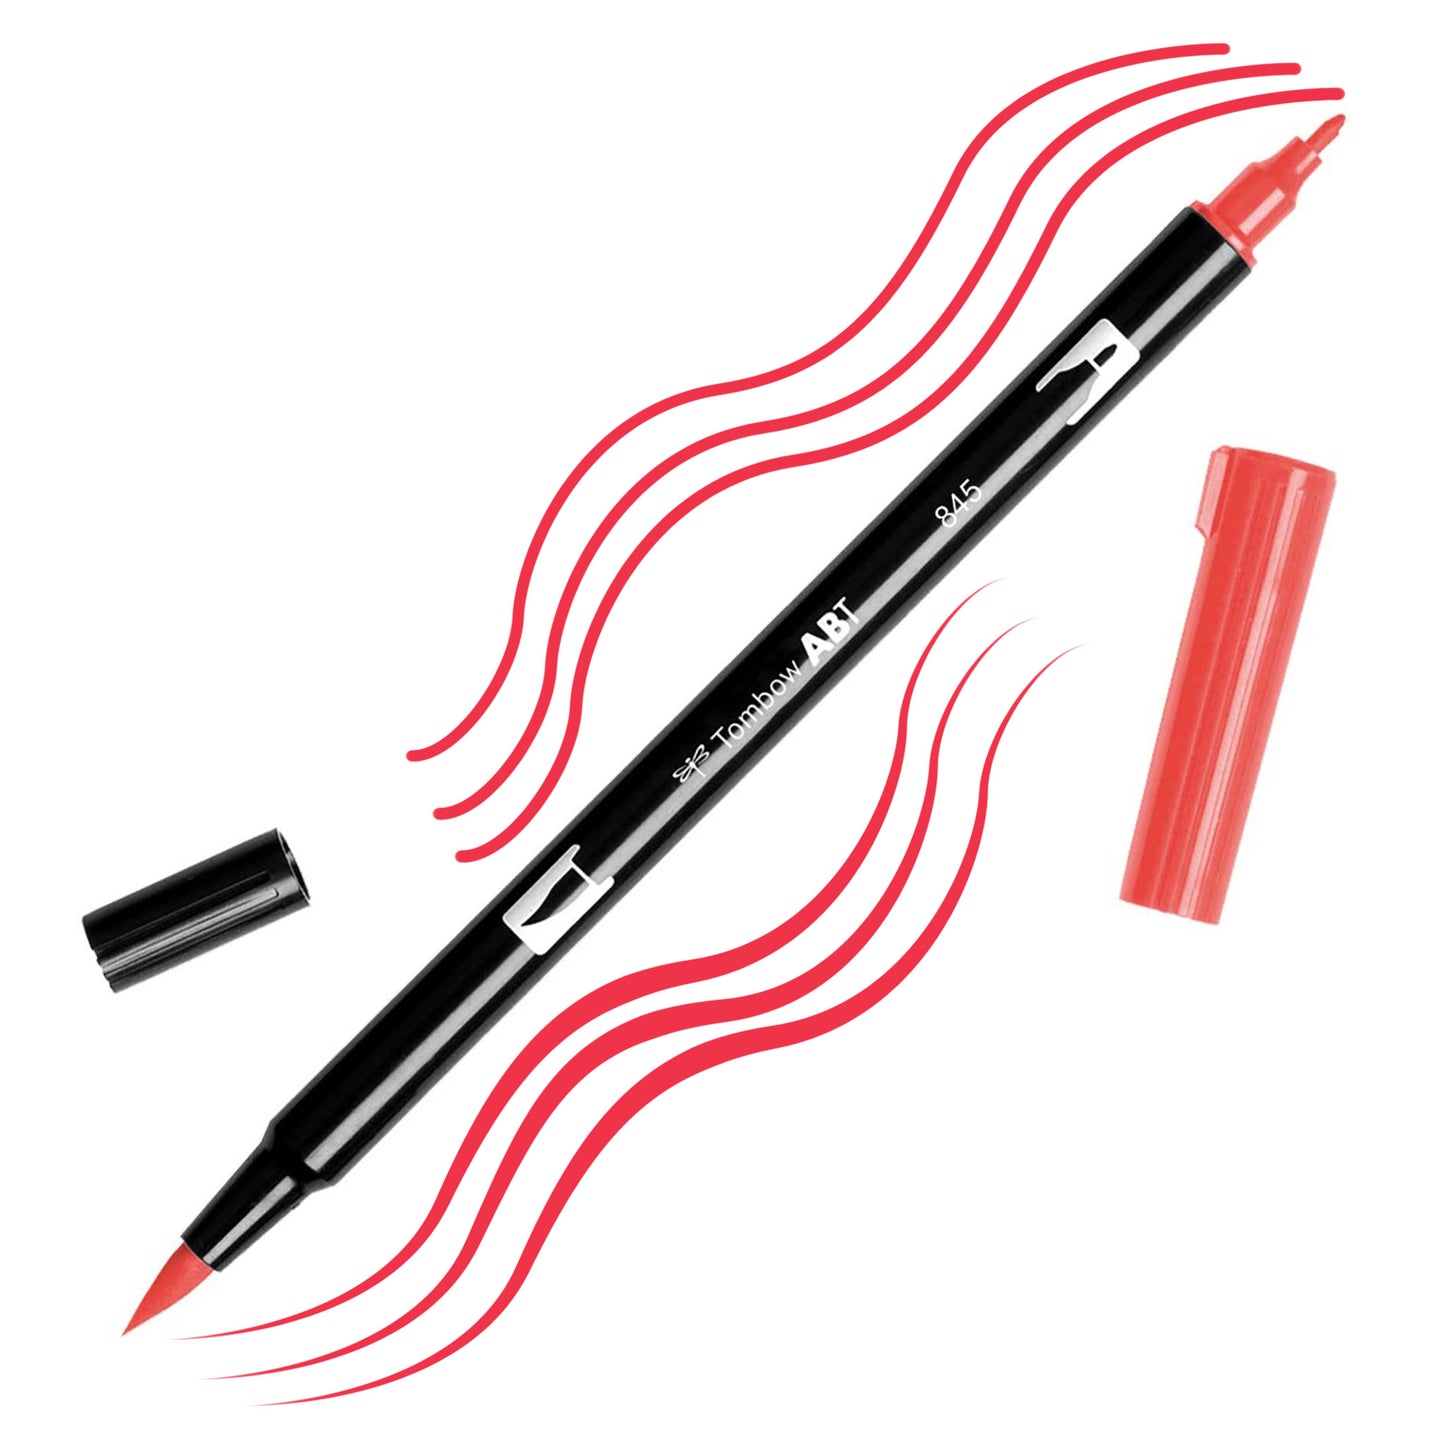 Carmine Tombow double-headed brush-pen with a flexible nylon fiber brush tip and a fine tip against a white background with Carmine strokes